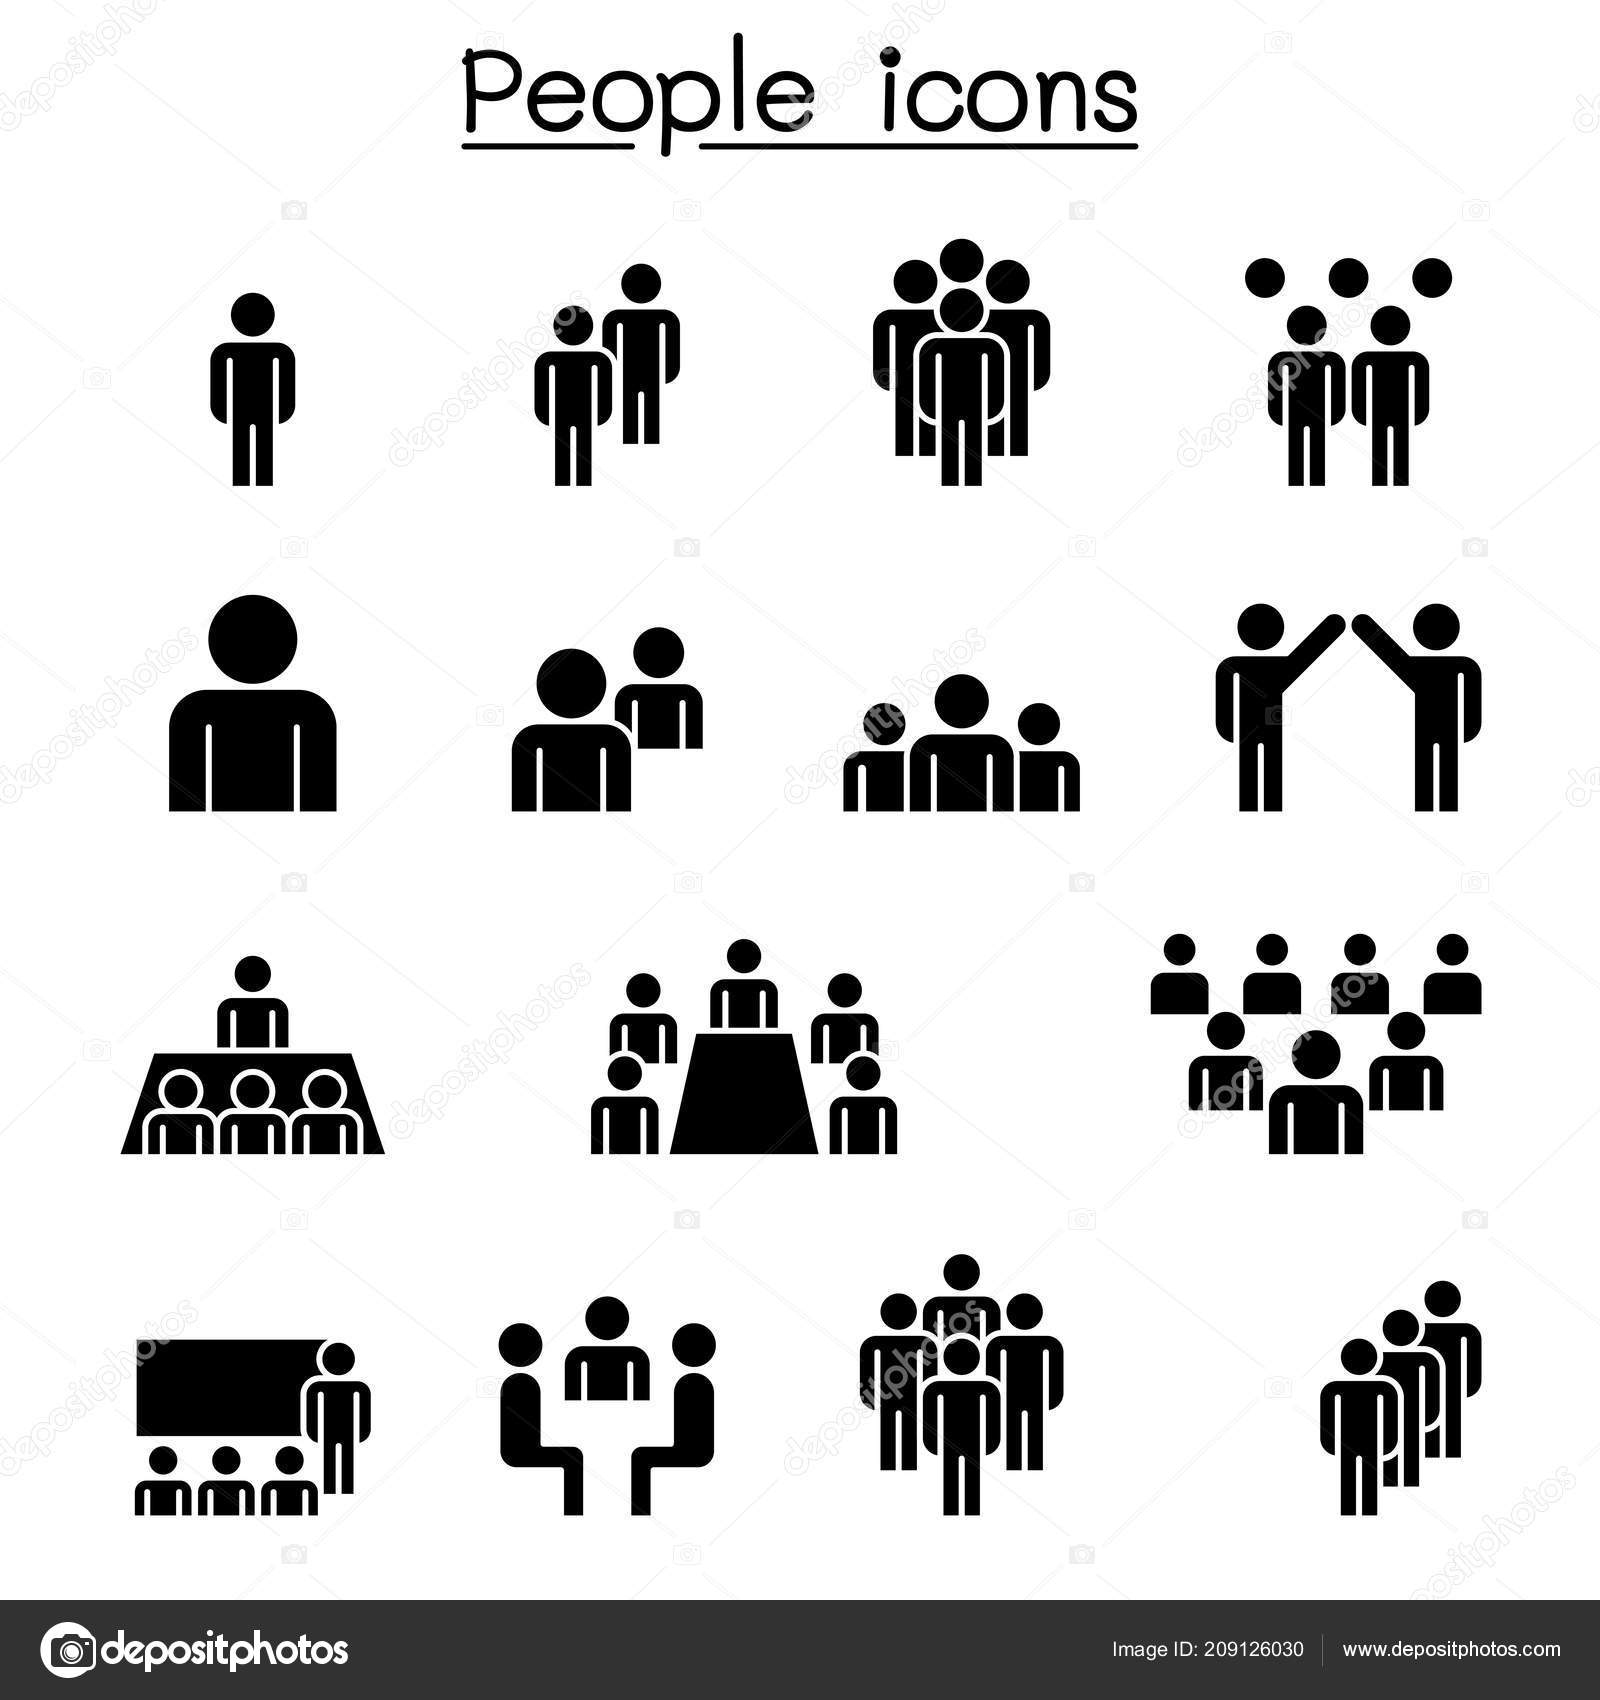 Culture - Free people icons